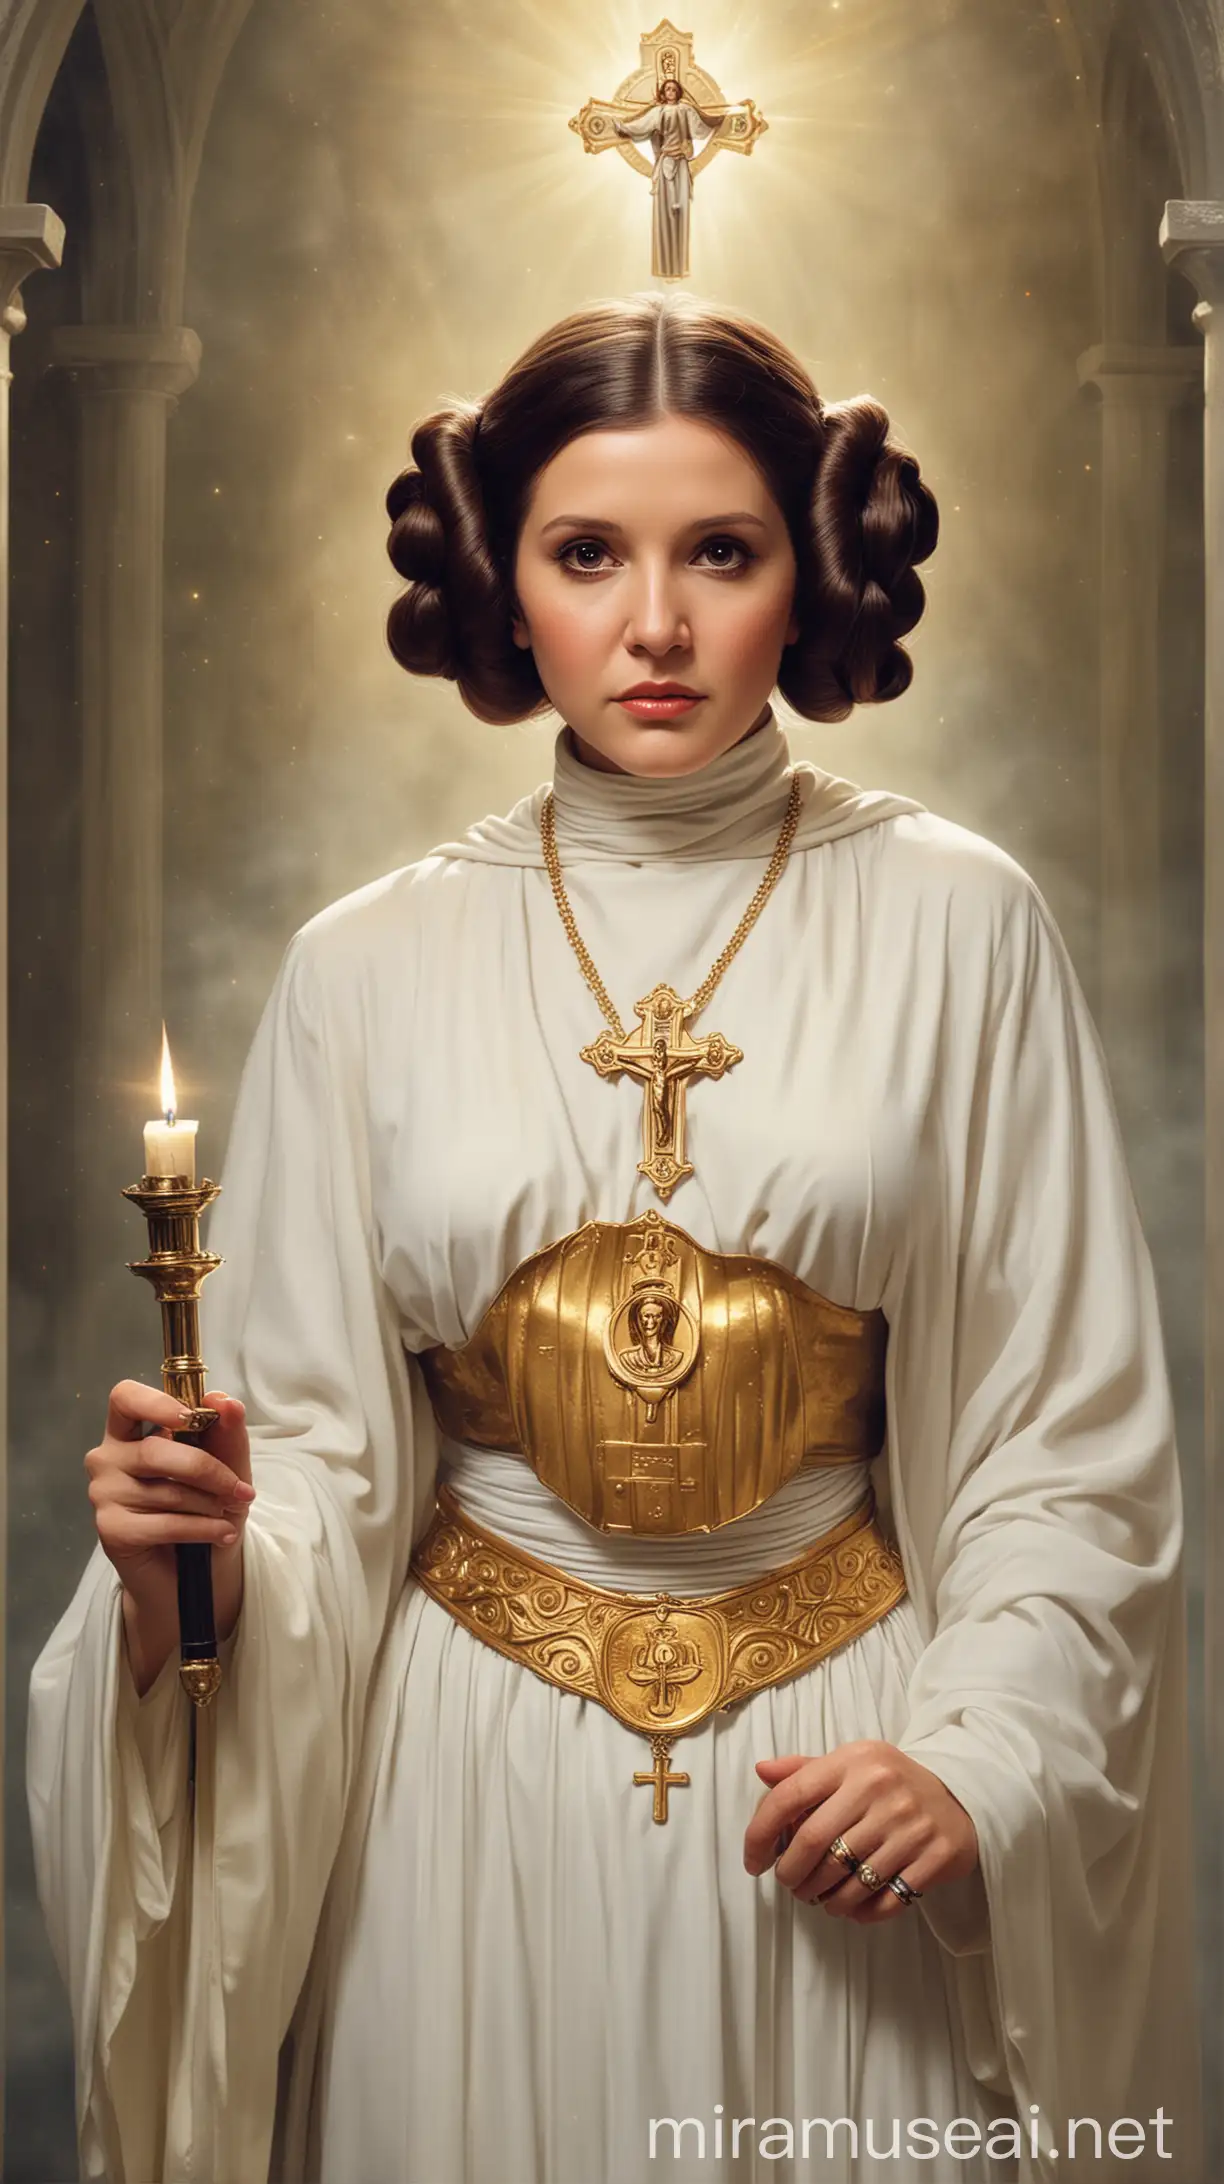 Princess Leia as a Catholic Saint Art Iconic Star Wars Character Revered in a Holy Light